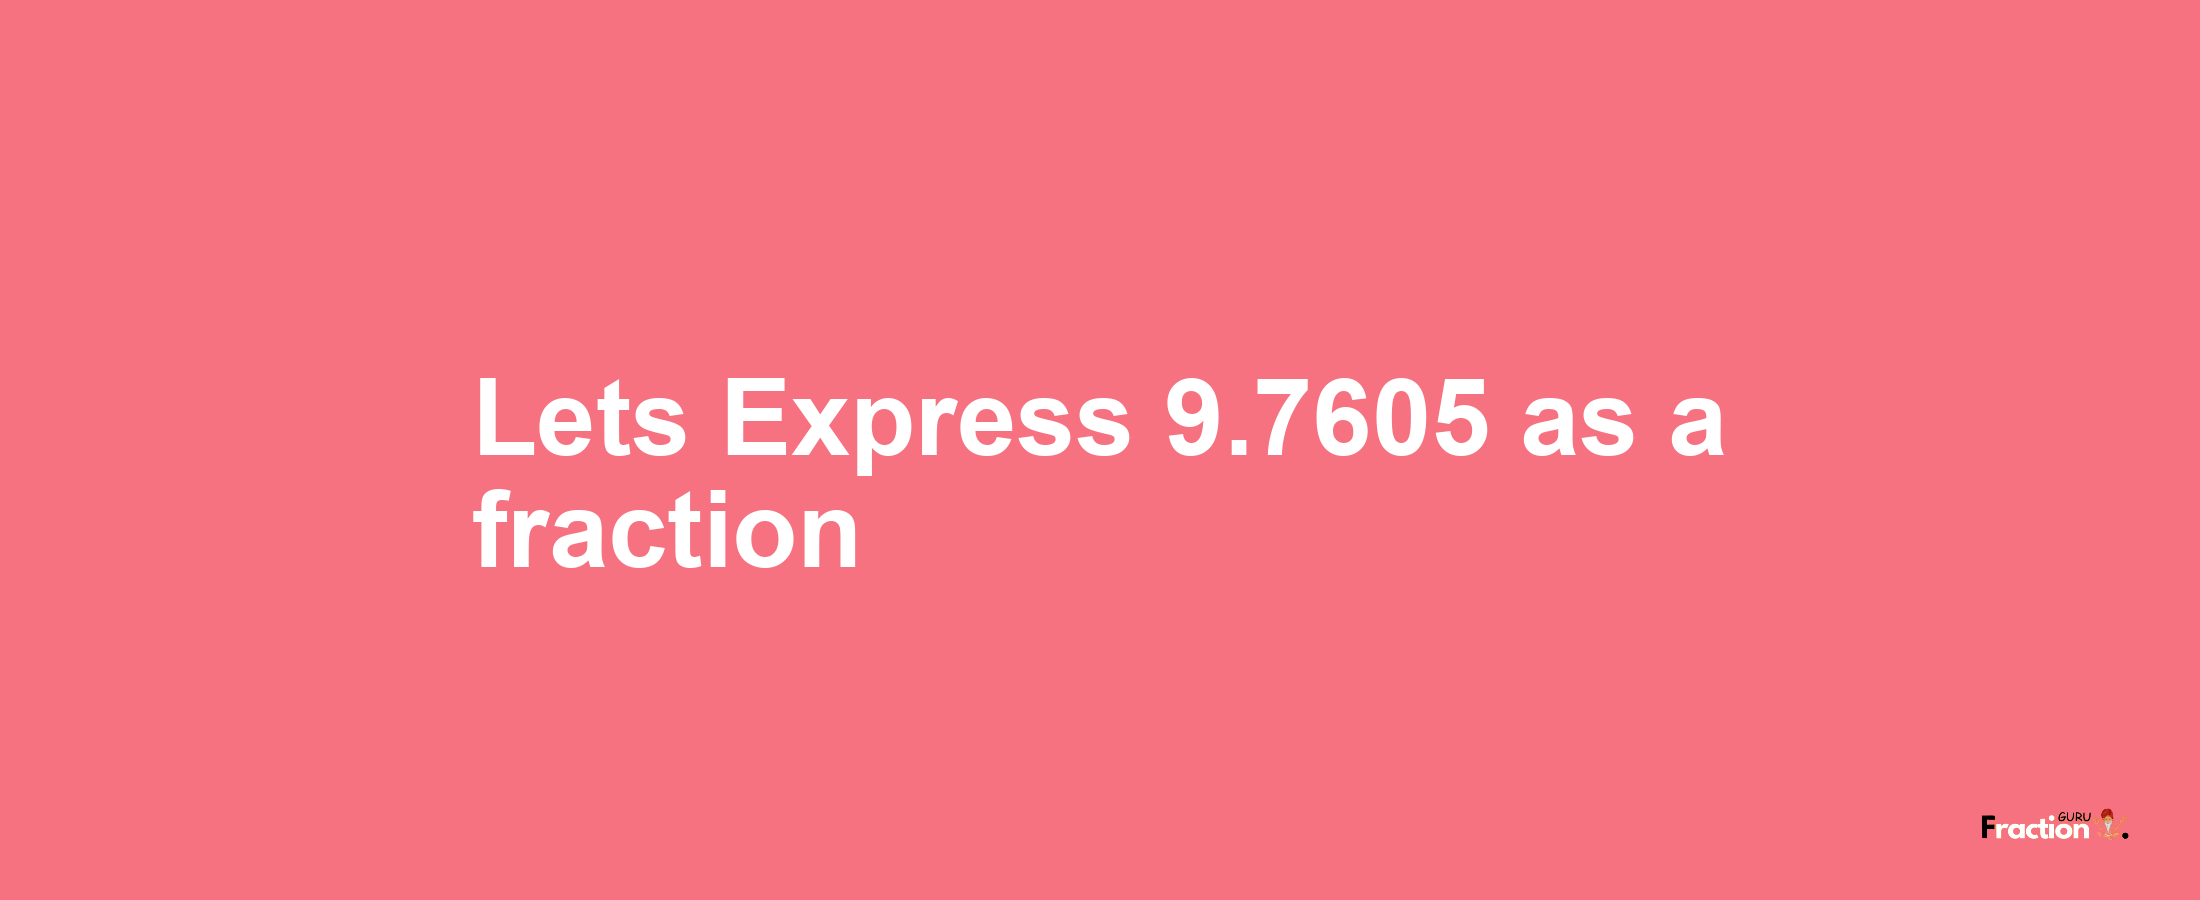 Lets Express 9.7605 as afraction